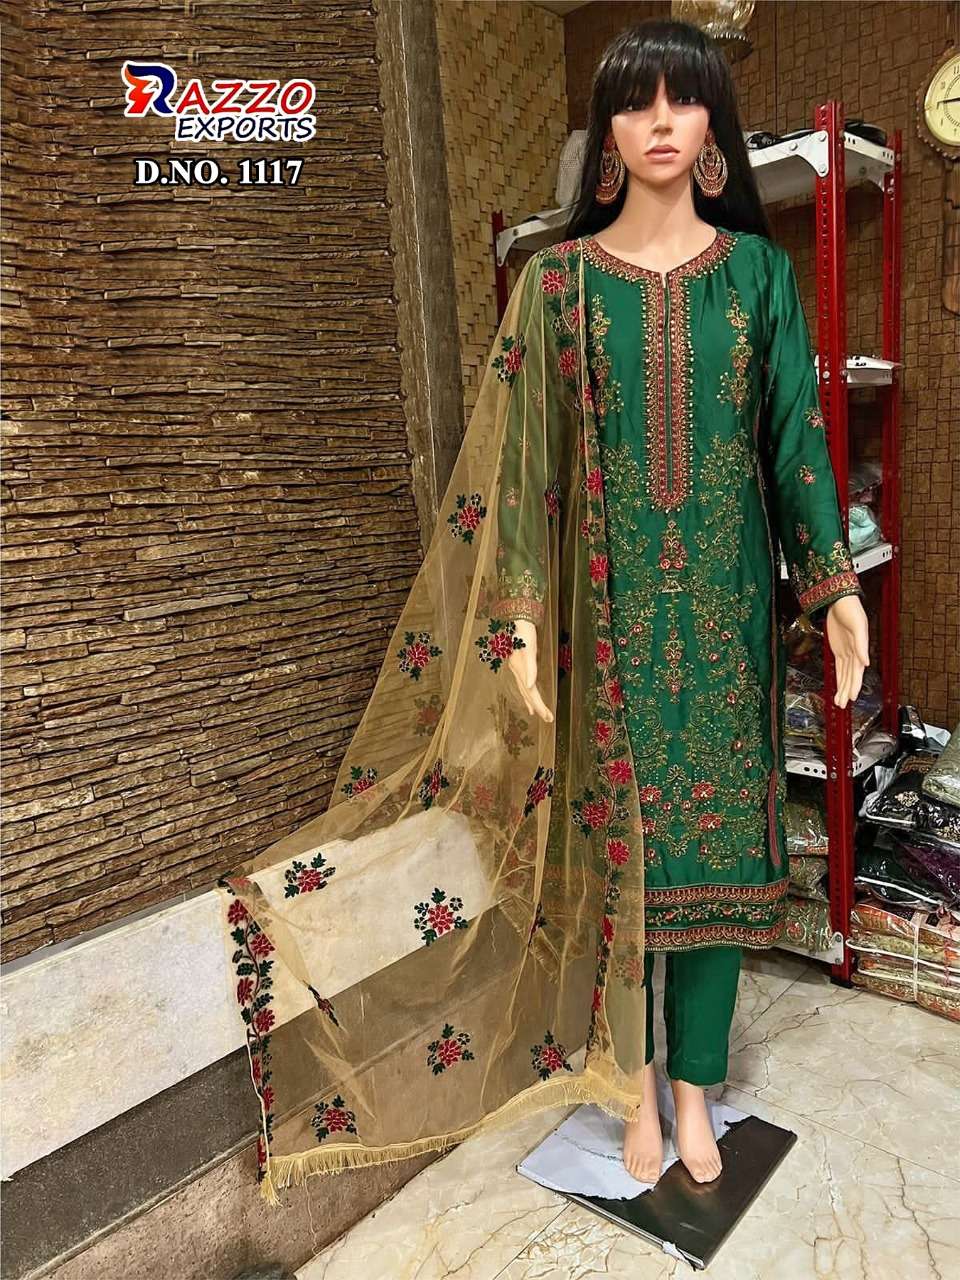 RAZZO VOL-5 HIT COLLECTION BY RAZZO EXPORTS 1117 TO 1118 SERIES DESIGNER BEAUTIFUL STYLISH PAKISATNI SUITS FANCY COLORFUL CASUAL WEAR & ETHNIC WEAR & READY TO WEAR GEORGETTE EMBROIDERY DRESSES AT WHOLESALE PRICE